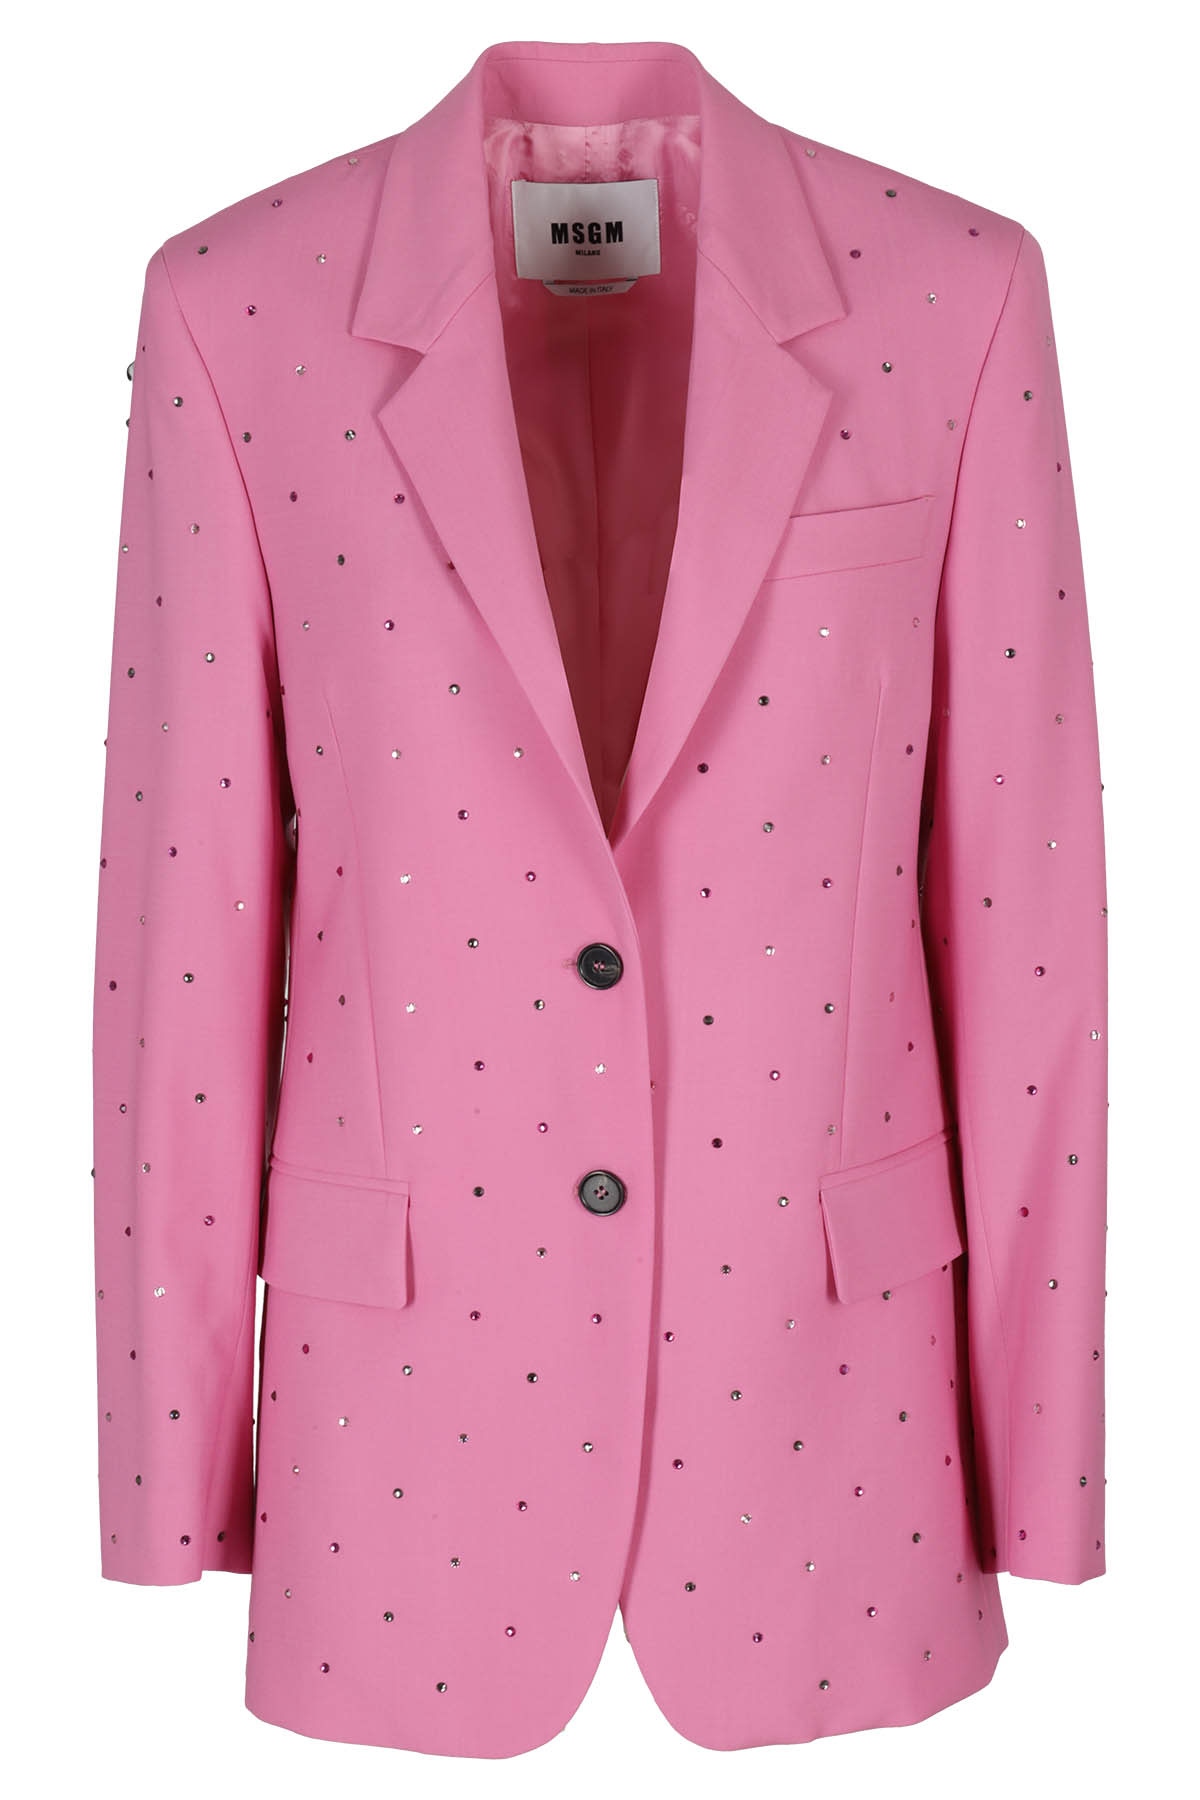 Msgm Jacket In Rosa